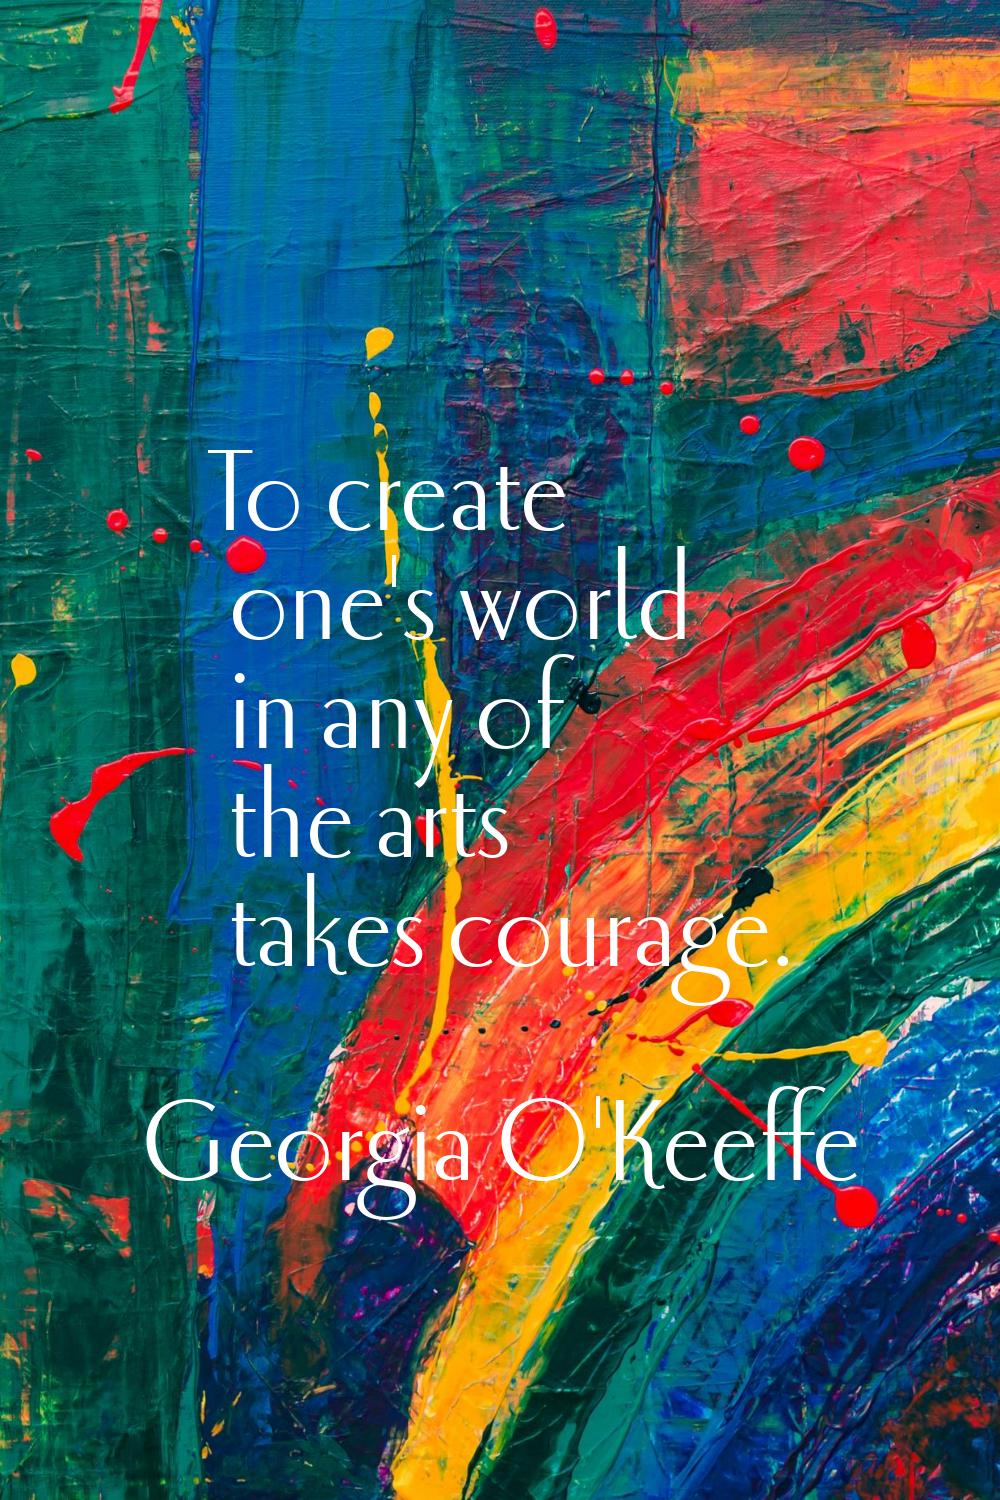 To create one's world in any of the arts takes courage.